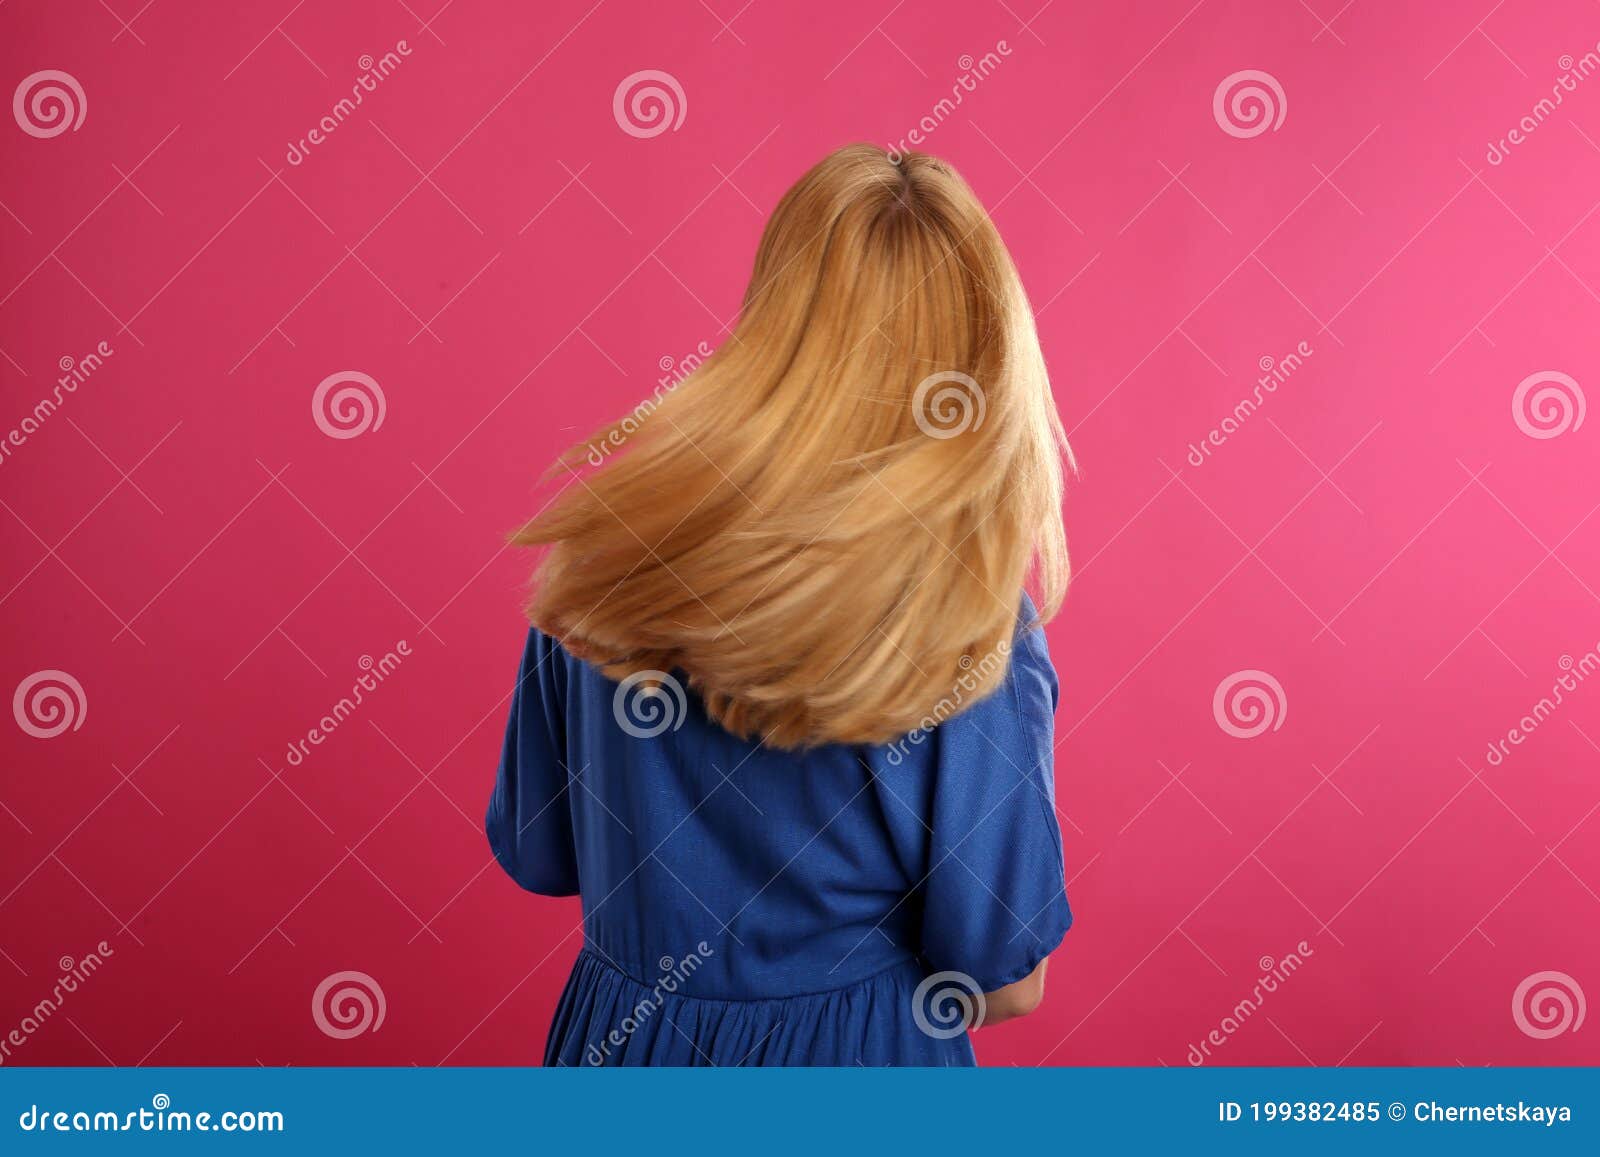 Blonde hair and pink frames - wide 1